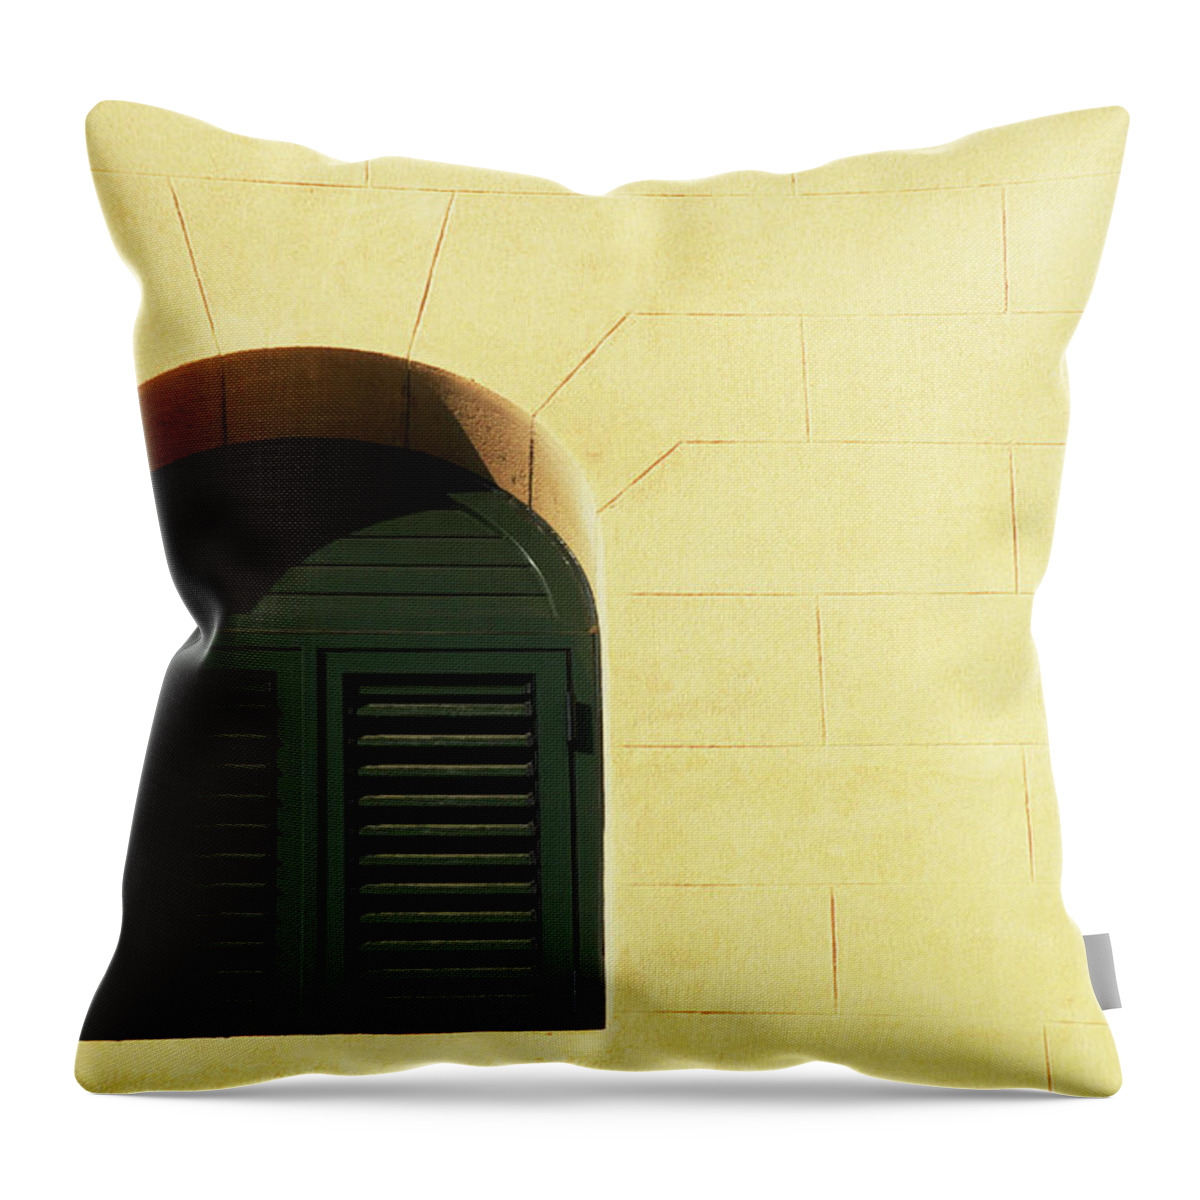 Empty Throw Pillow featuring the photograph Window Closed by Joelle Icard